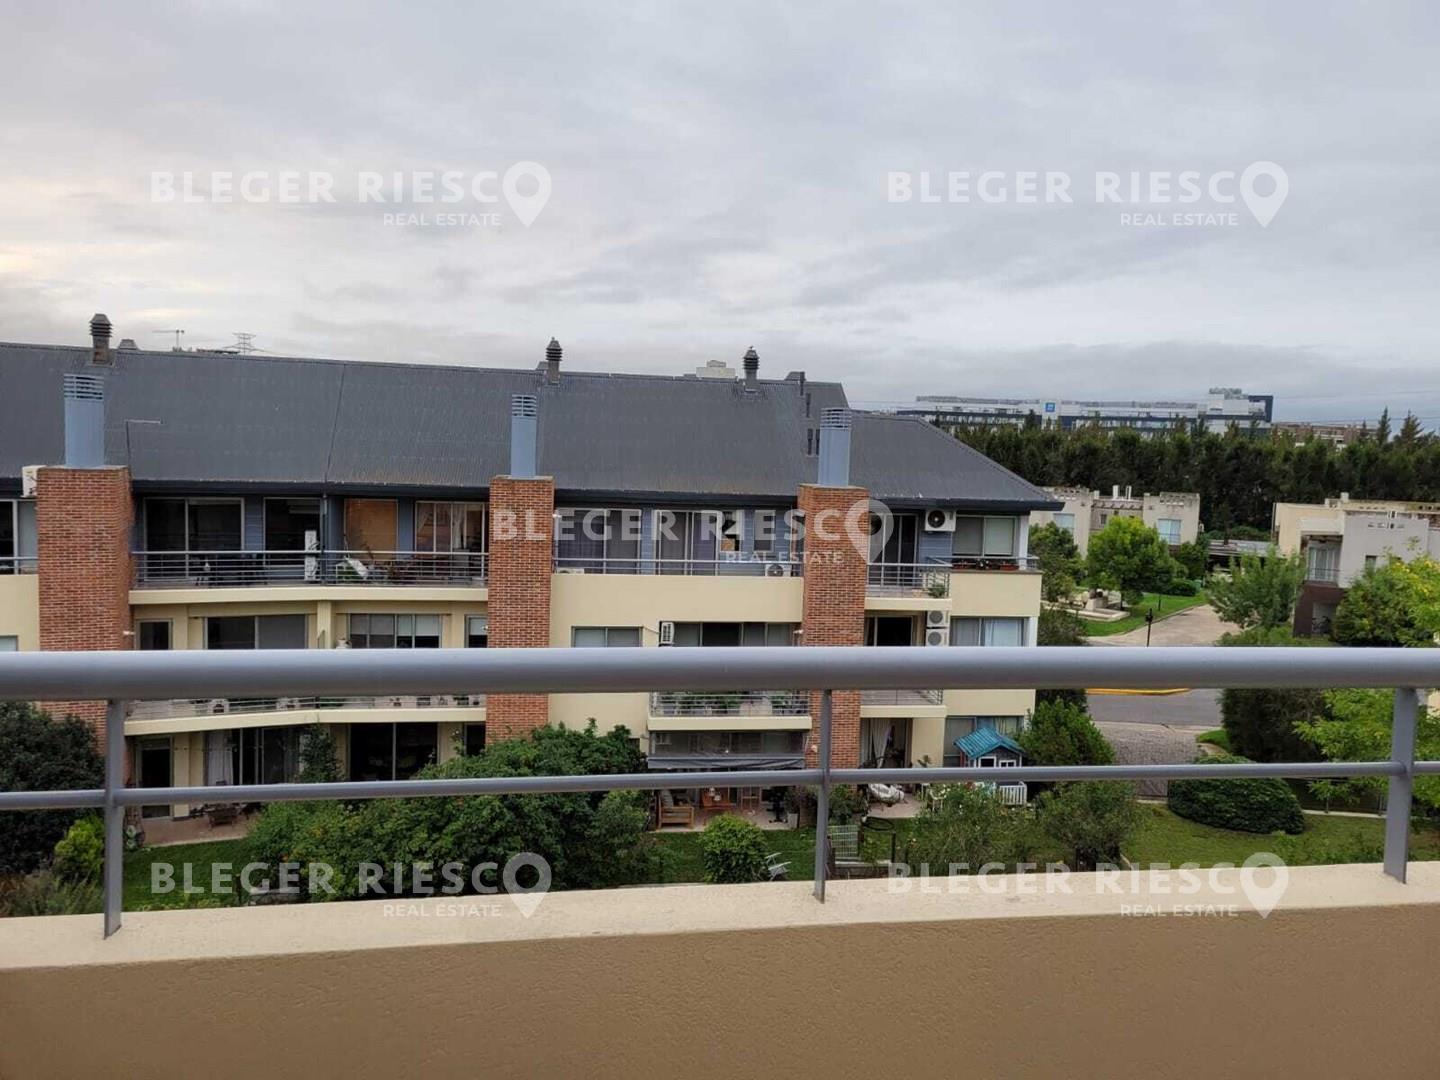 #5002117 | Rental | Apartment | Portezuelo (Bleger-Riesco Real State)